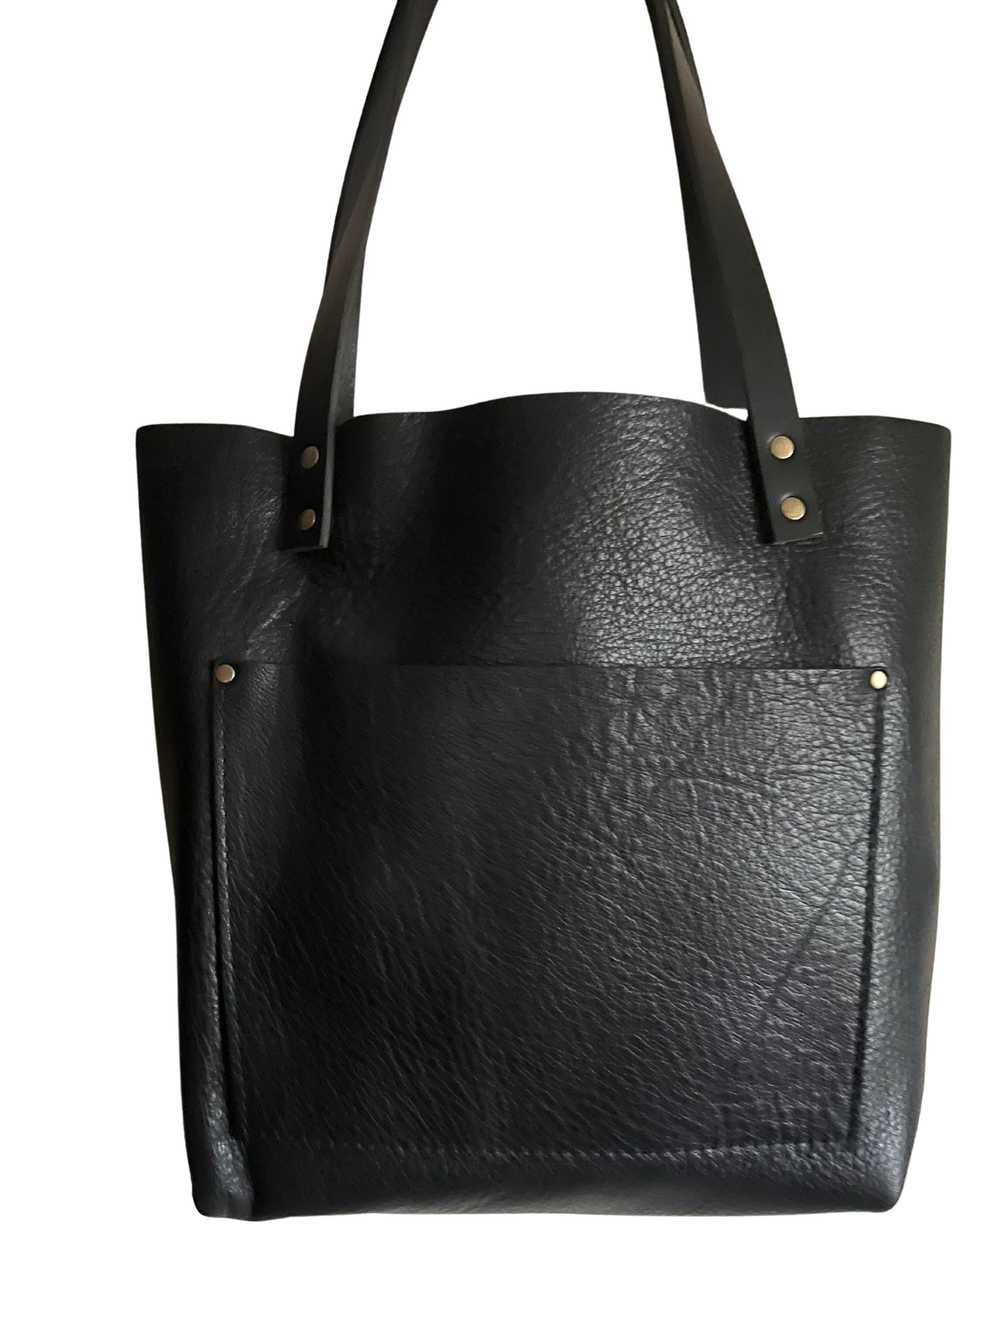 Portland Leather 'Almost Perfect' Leather Tote Bag - image 4